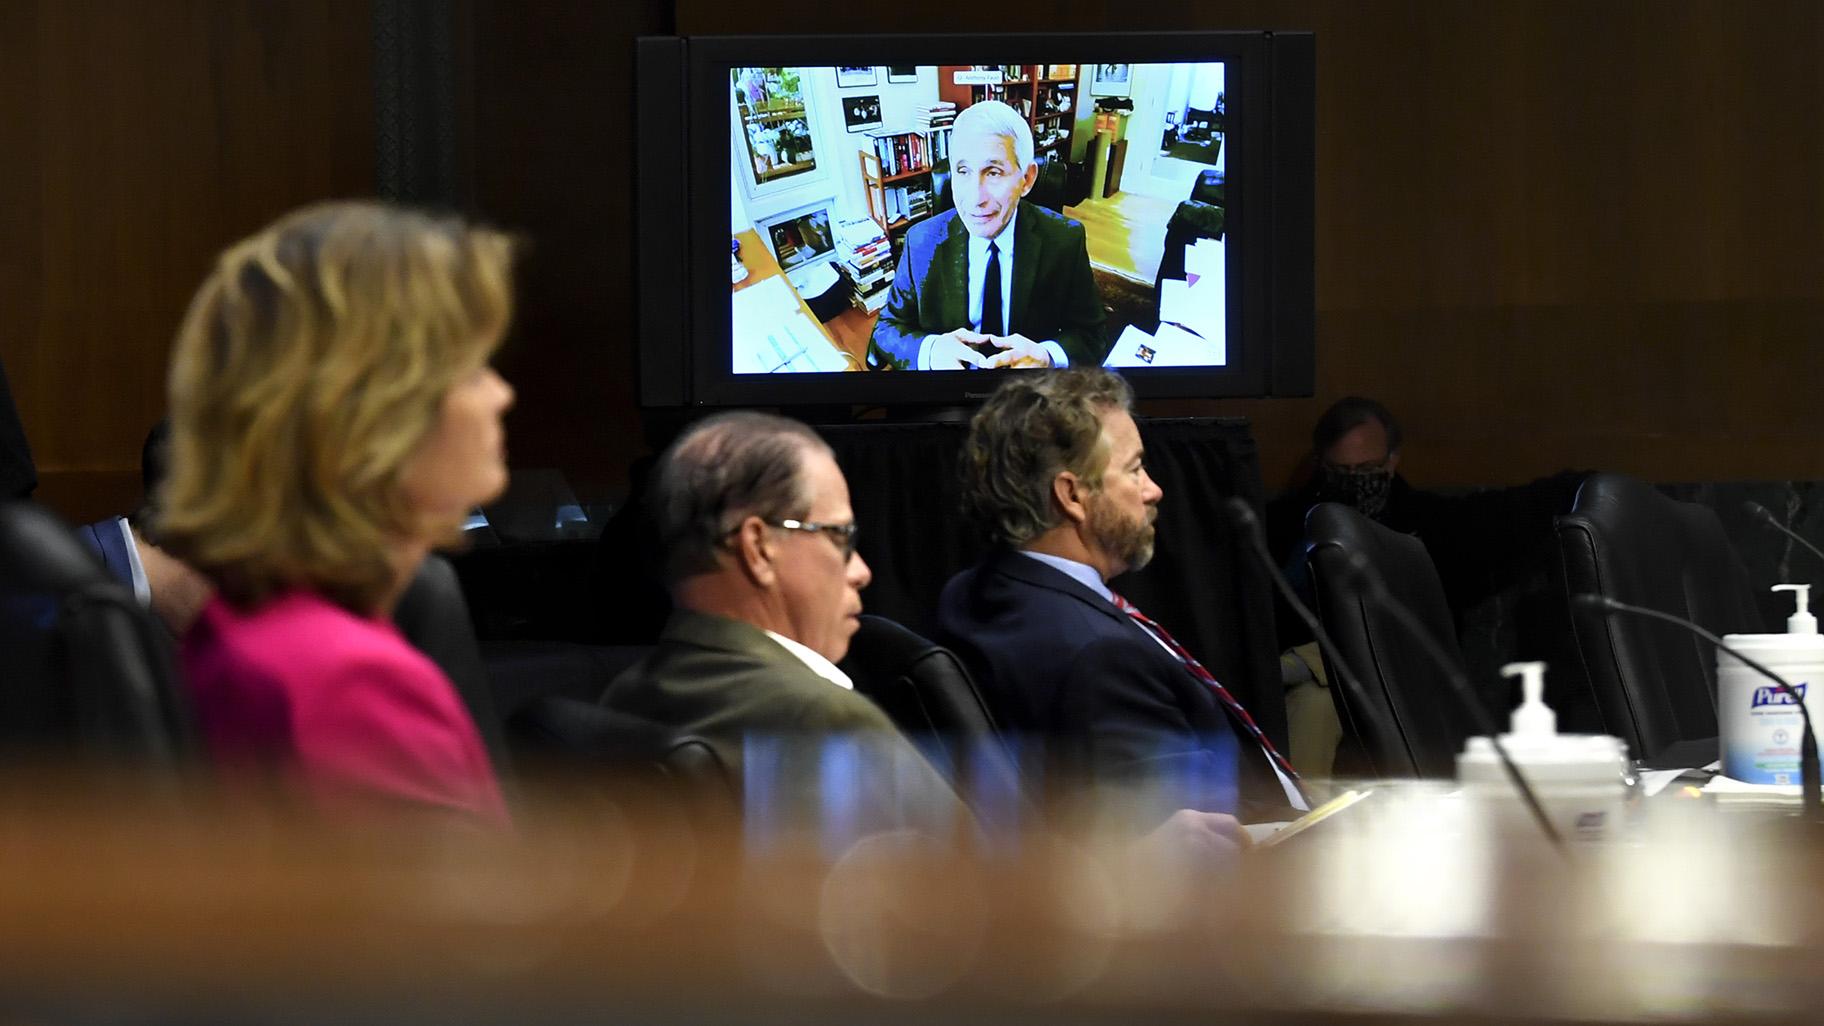 Senators listen as Dr. Anthony Fauci, director of the National Institute of Allergy and Infectious Diseases, speaks remotely during a virtual Senate Committee for Health, Education, Labor, and Pensions hearing, Tuesday, May 12, 2020 on Capitol Hill in Washington. (Toni L. Sandys / The Washington Post via AP, Pool)